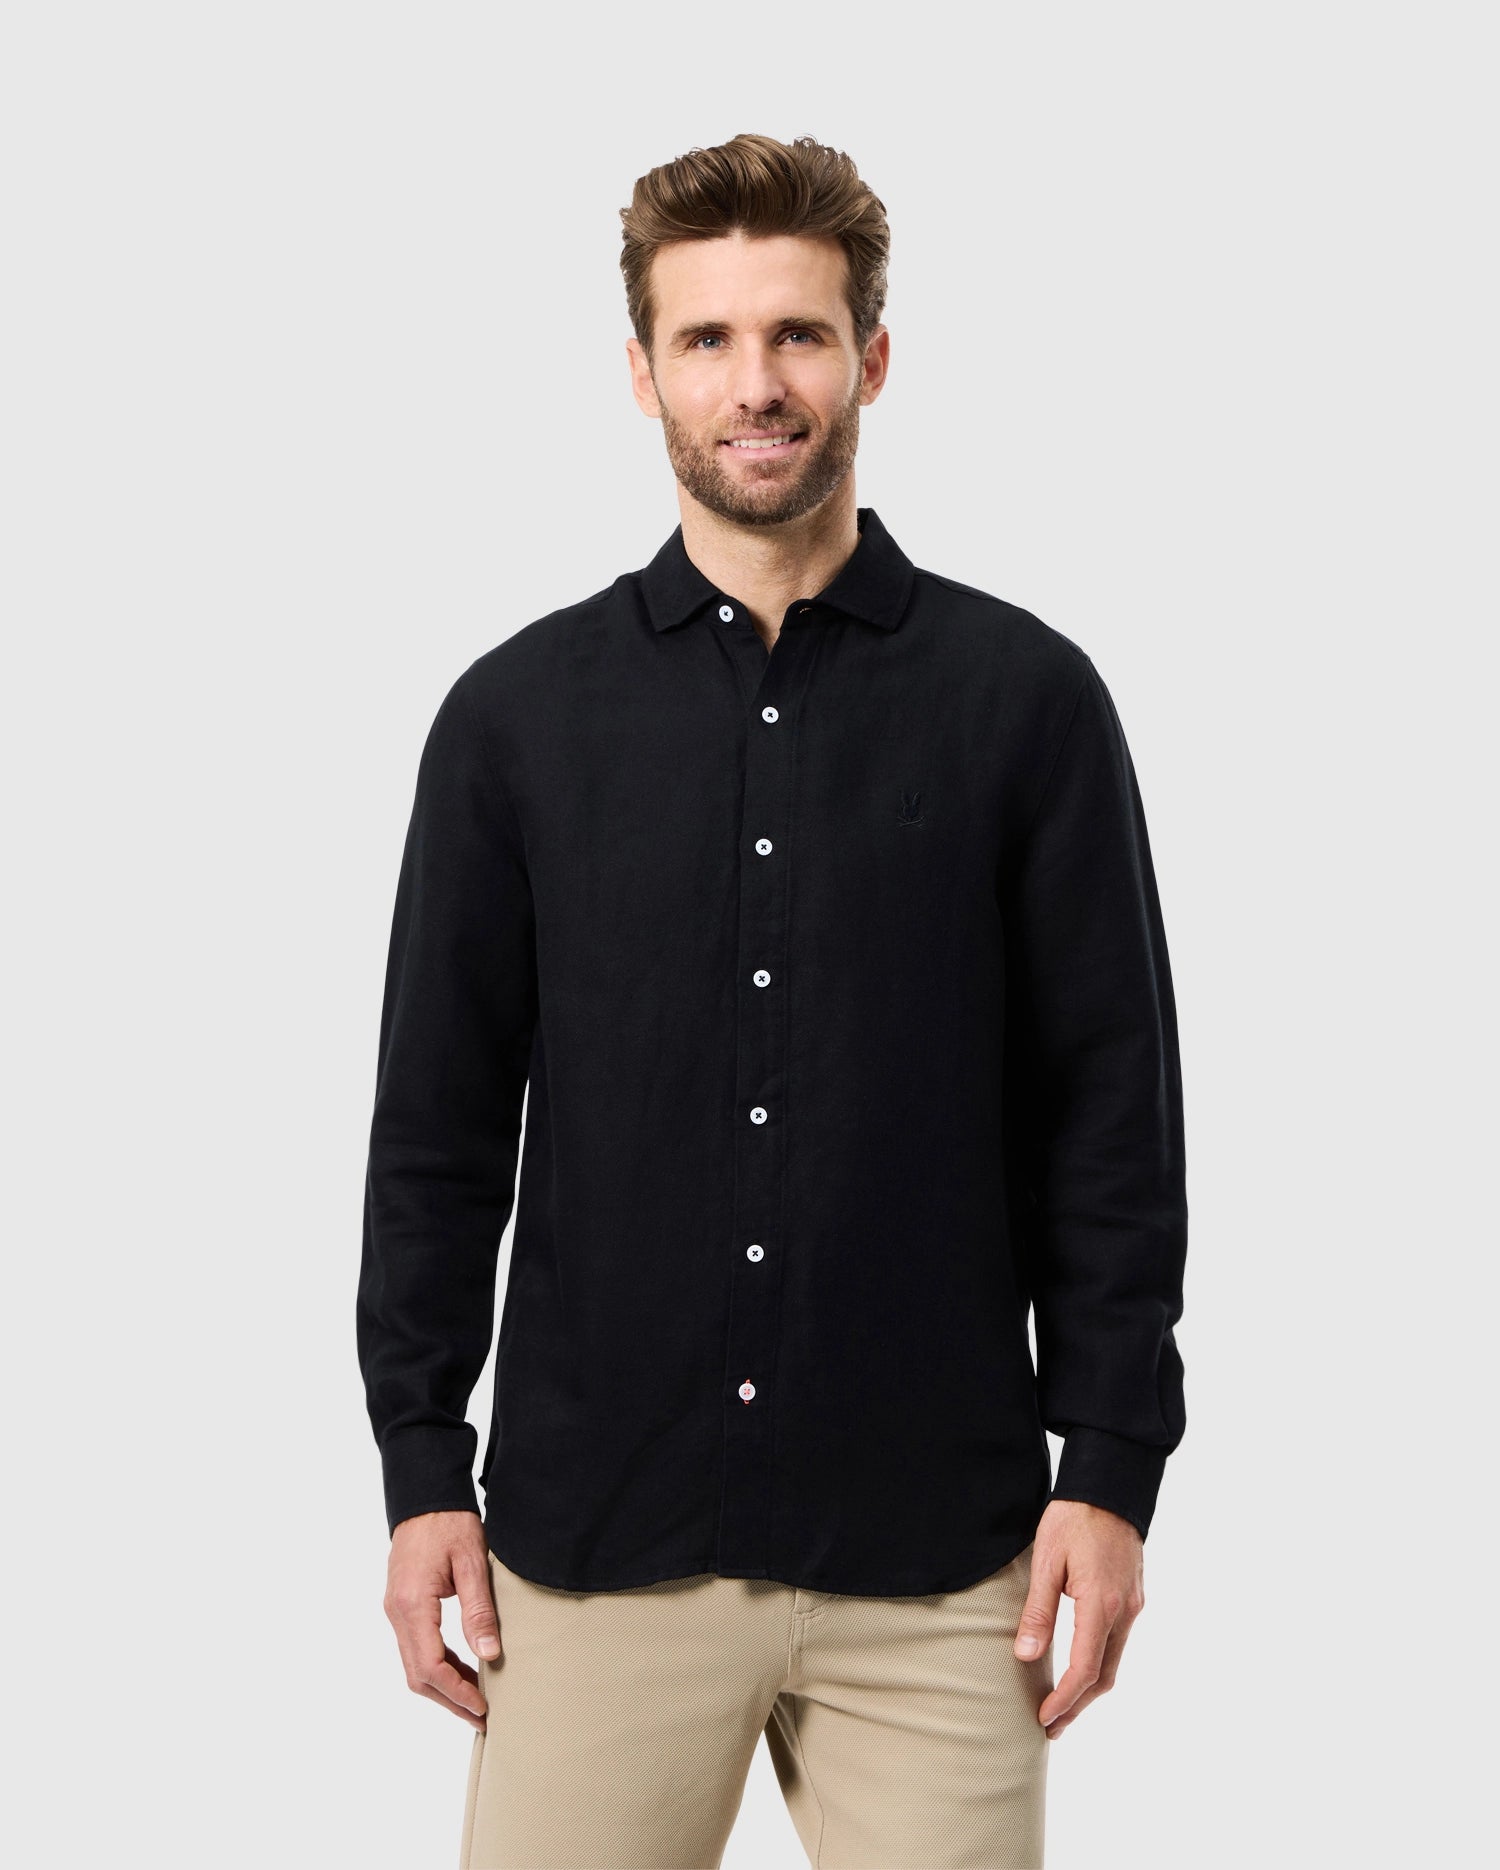 A man with short brown hair and a beard smiles while wearing the Psycho Bunny MENS CAMERON LINEN LONG SLEEVE SHIRT - B6C586C200 with beige pants. He stands against a plain light gray background.